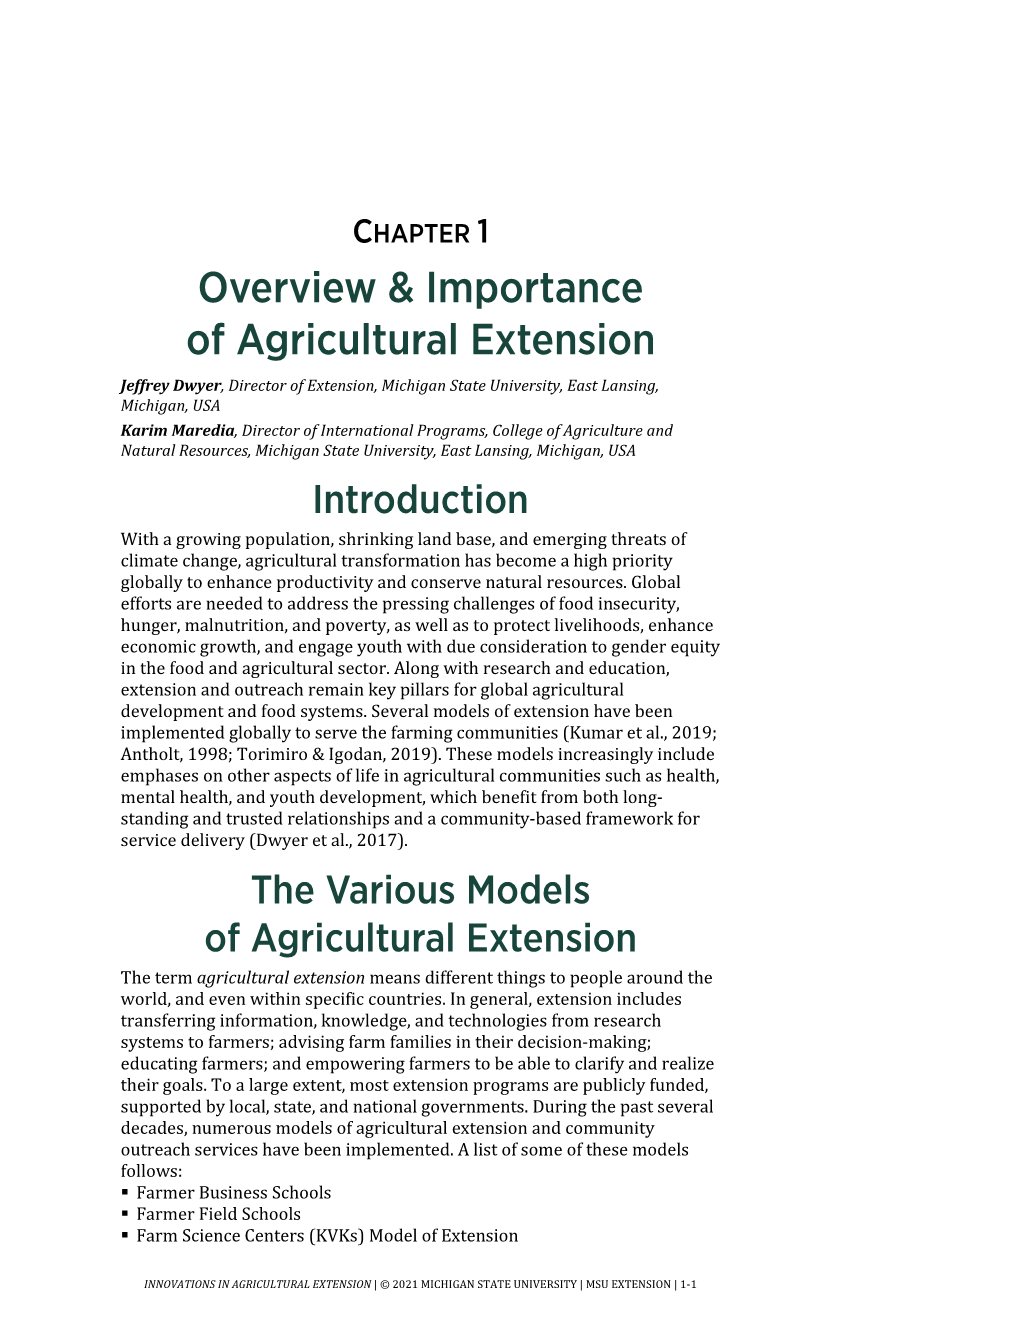 Overview & Importance of Agricultural Extension